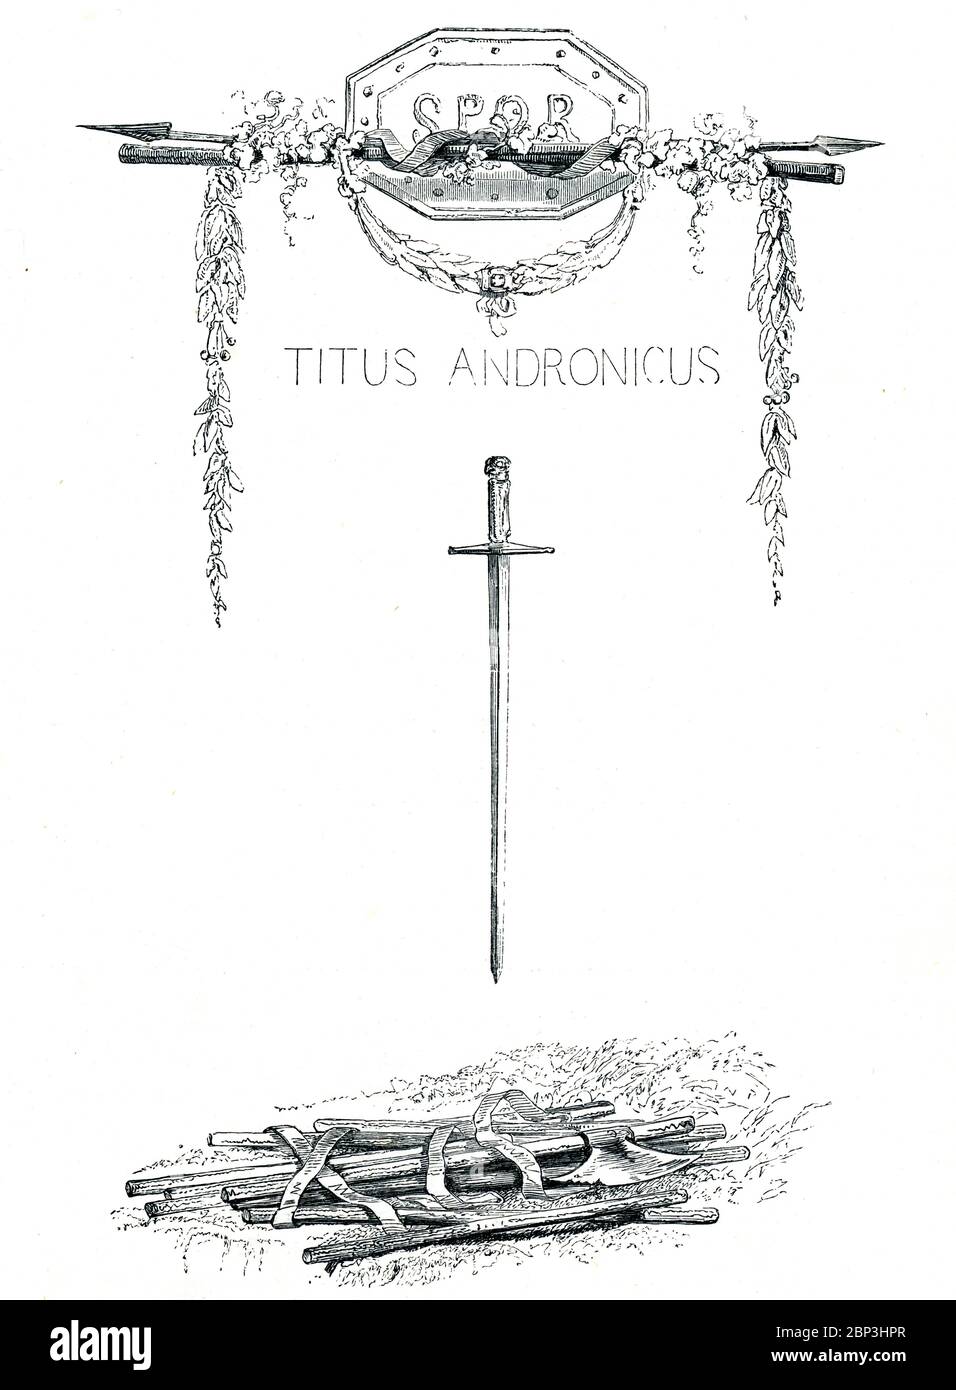 Titus Andronicus Victorian book frontispiece for the tragedy play by William Shakespeare about a Roman general and his violent revenge on Tamora Queen of the Goths, from the 1849 illustrated book Heroines of Shakespeare Stock Photo